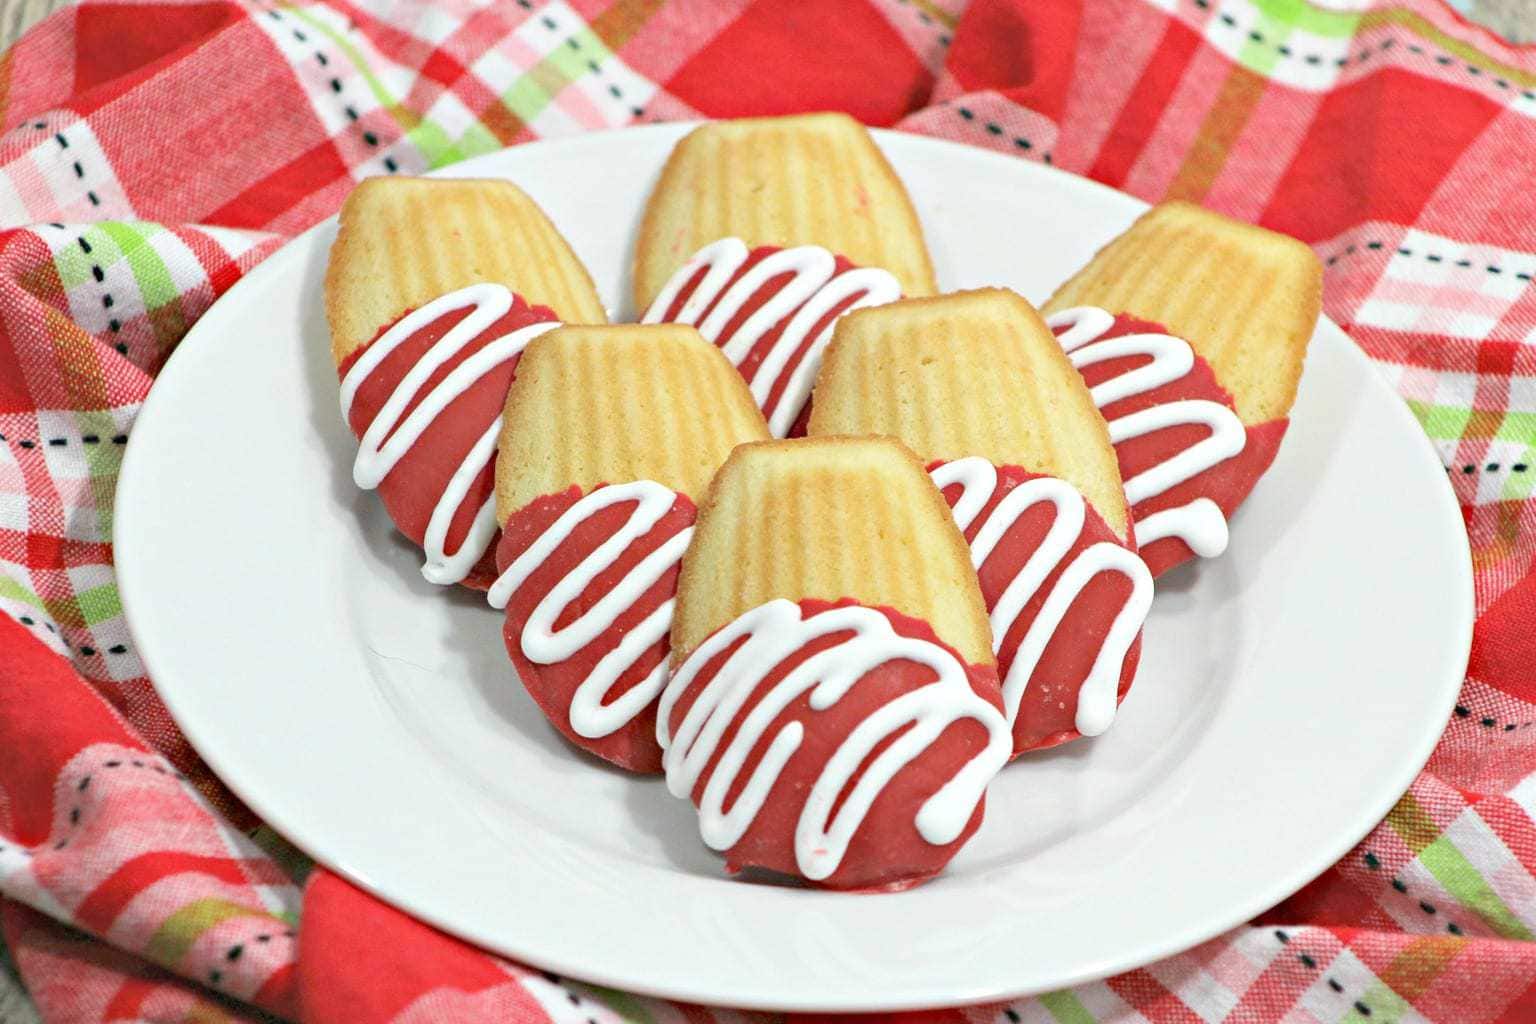 Red and white Chocolate Covered Madeleine cookies on a white plate on a red plaid cloth.